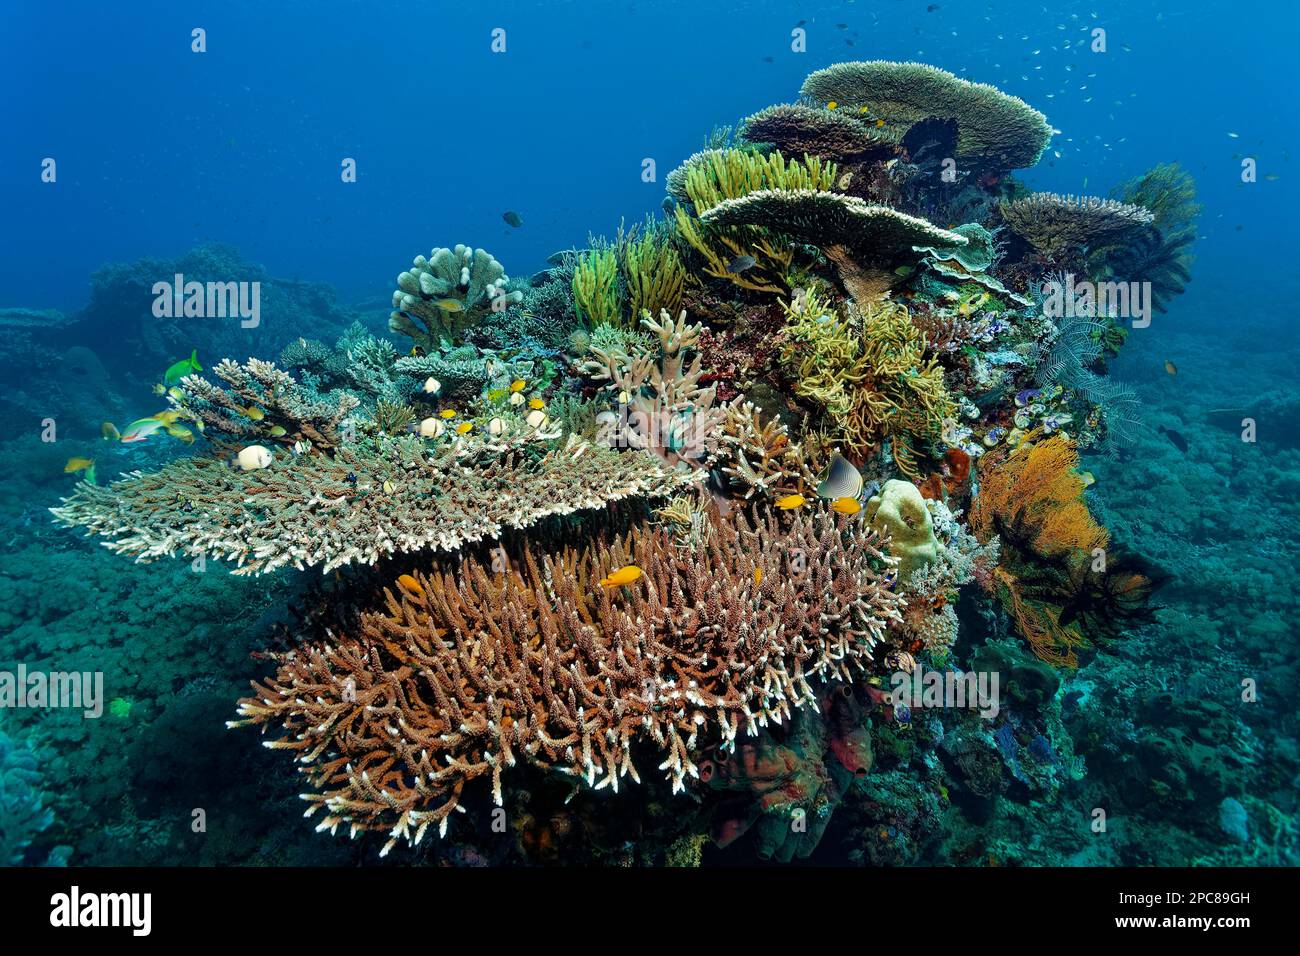 Coral (Comatulida) reef with various Acropora stony corals (Acroporidae), soft corals (Alcyonacea), on the right hair stars, and feather hydroid Stock Photo